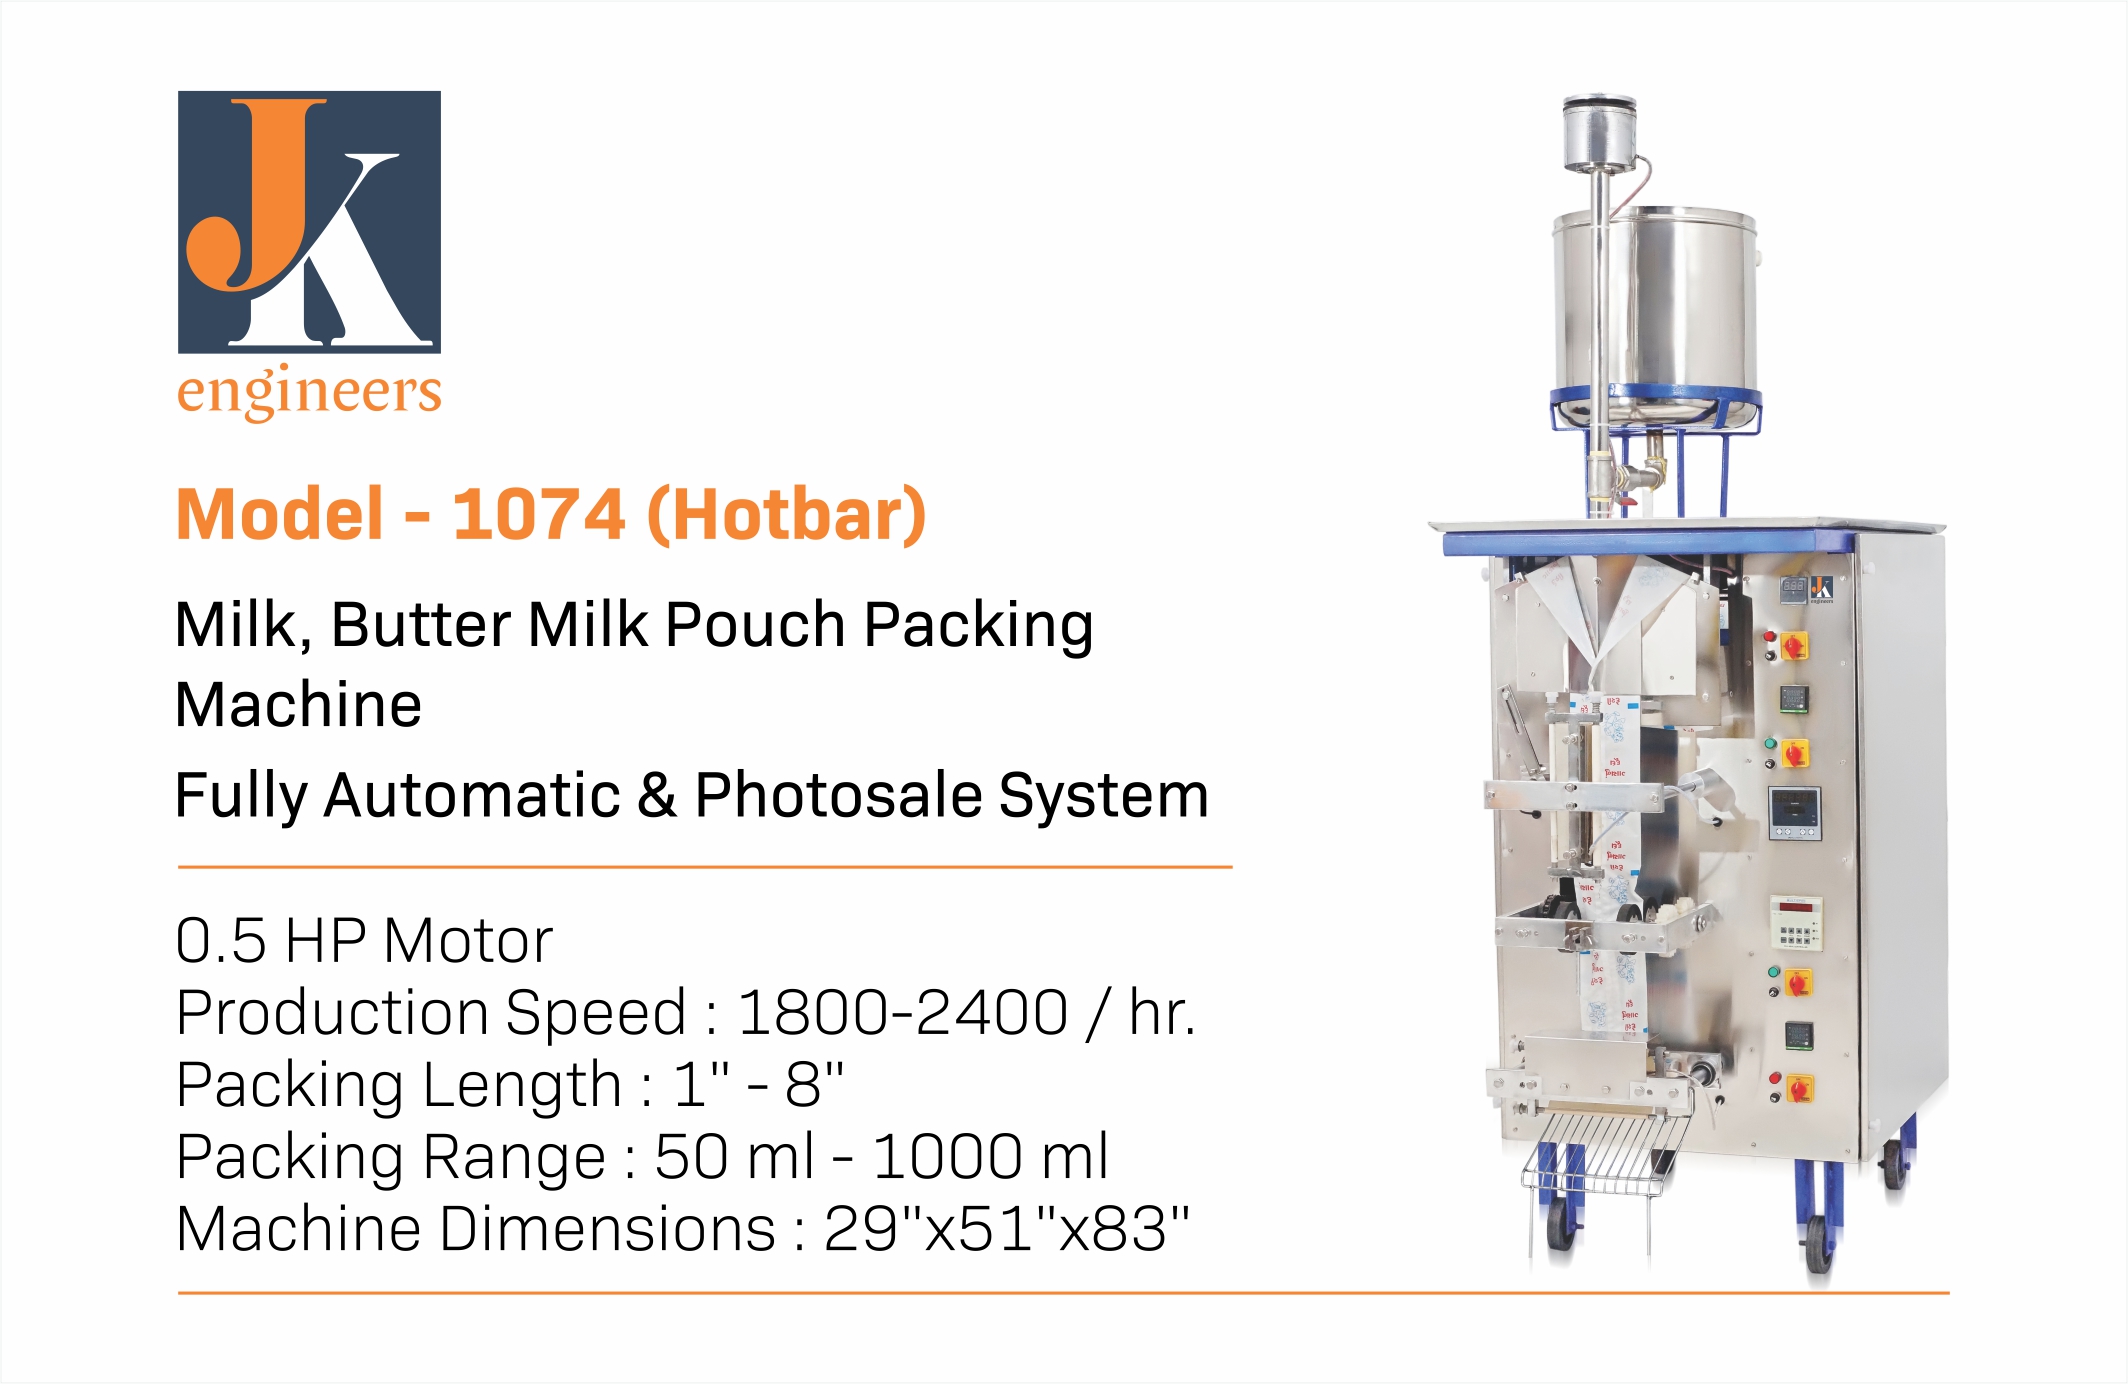 POUCH PACKING MACHINE FULLY AUTOMATIC PHOTO SALE SYSTEM MANUFACTURERS IN UTTAR PRADESH